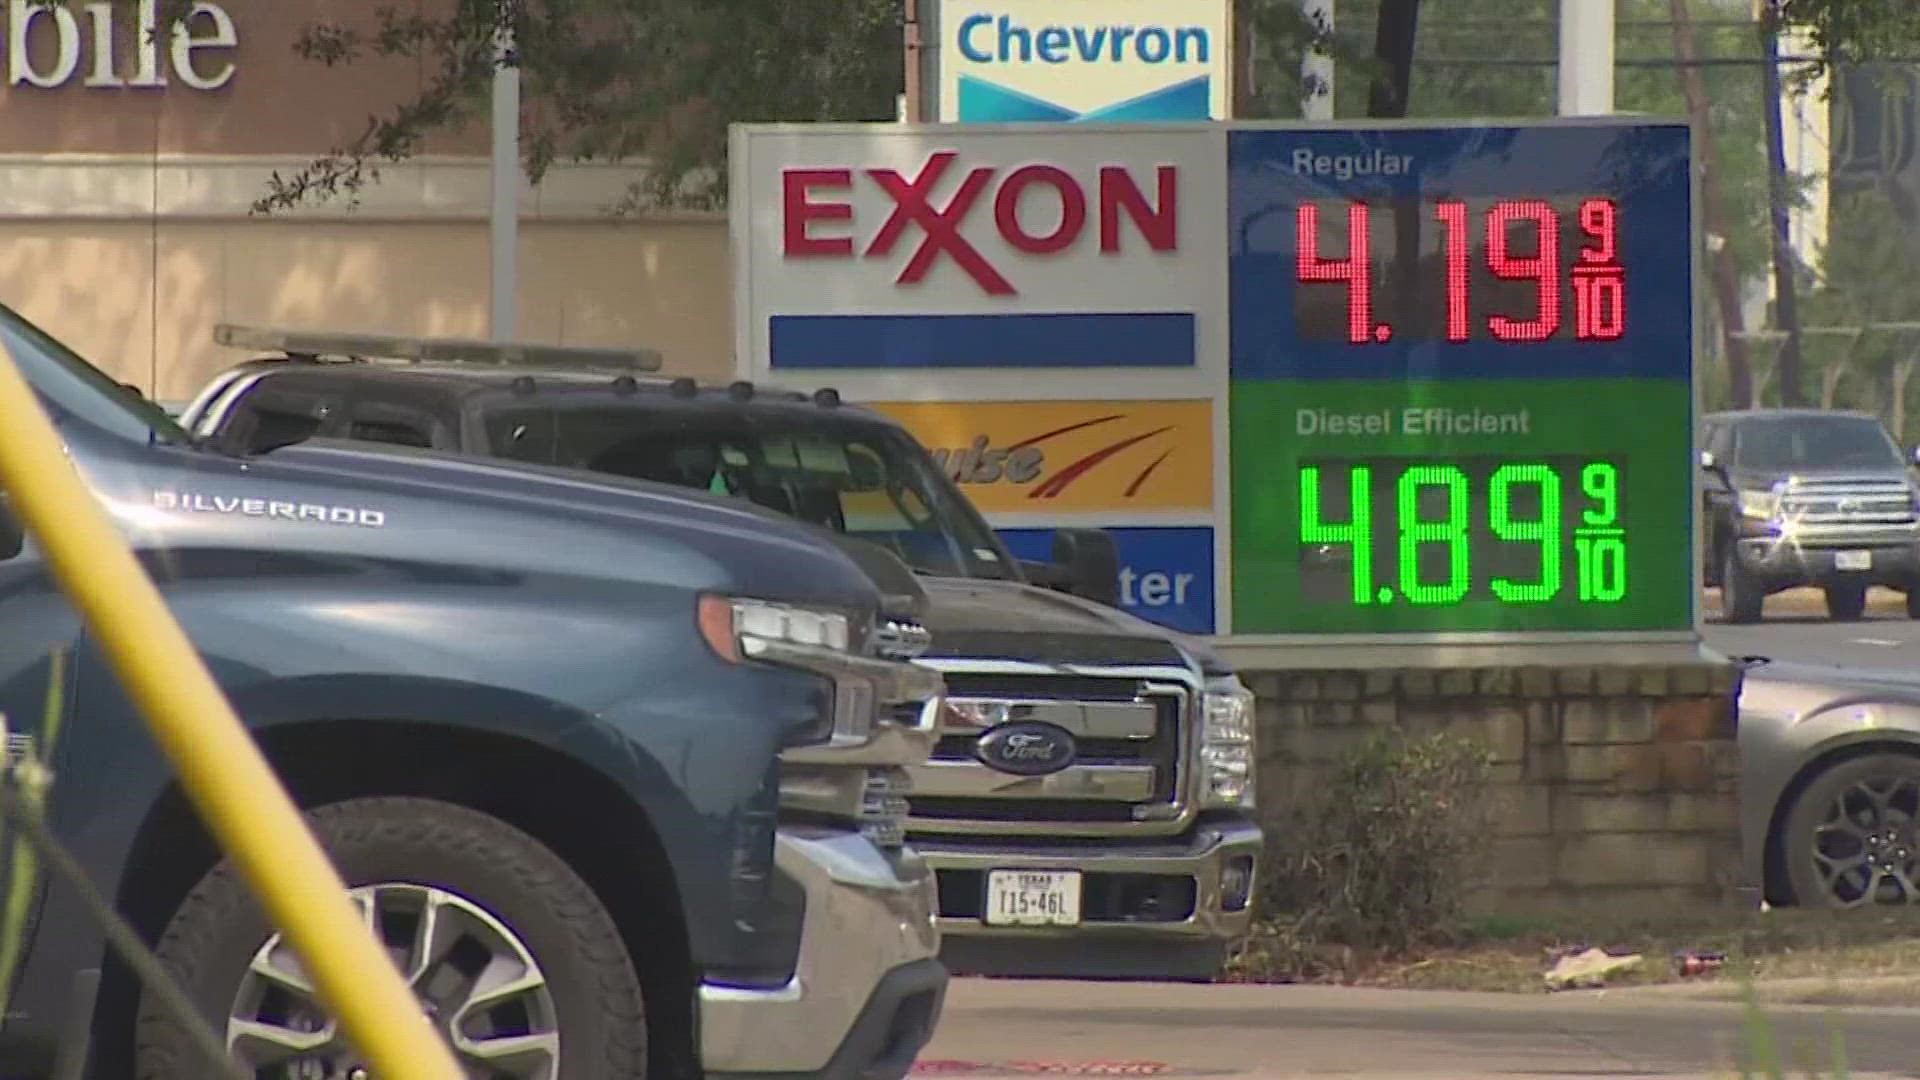 Experts warn that although drivers may be weary, gas prices will likely still go up in the near future. But there are things you can do to plan and save.